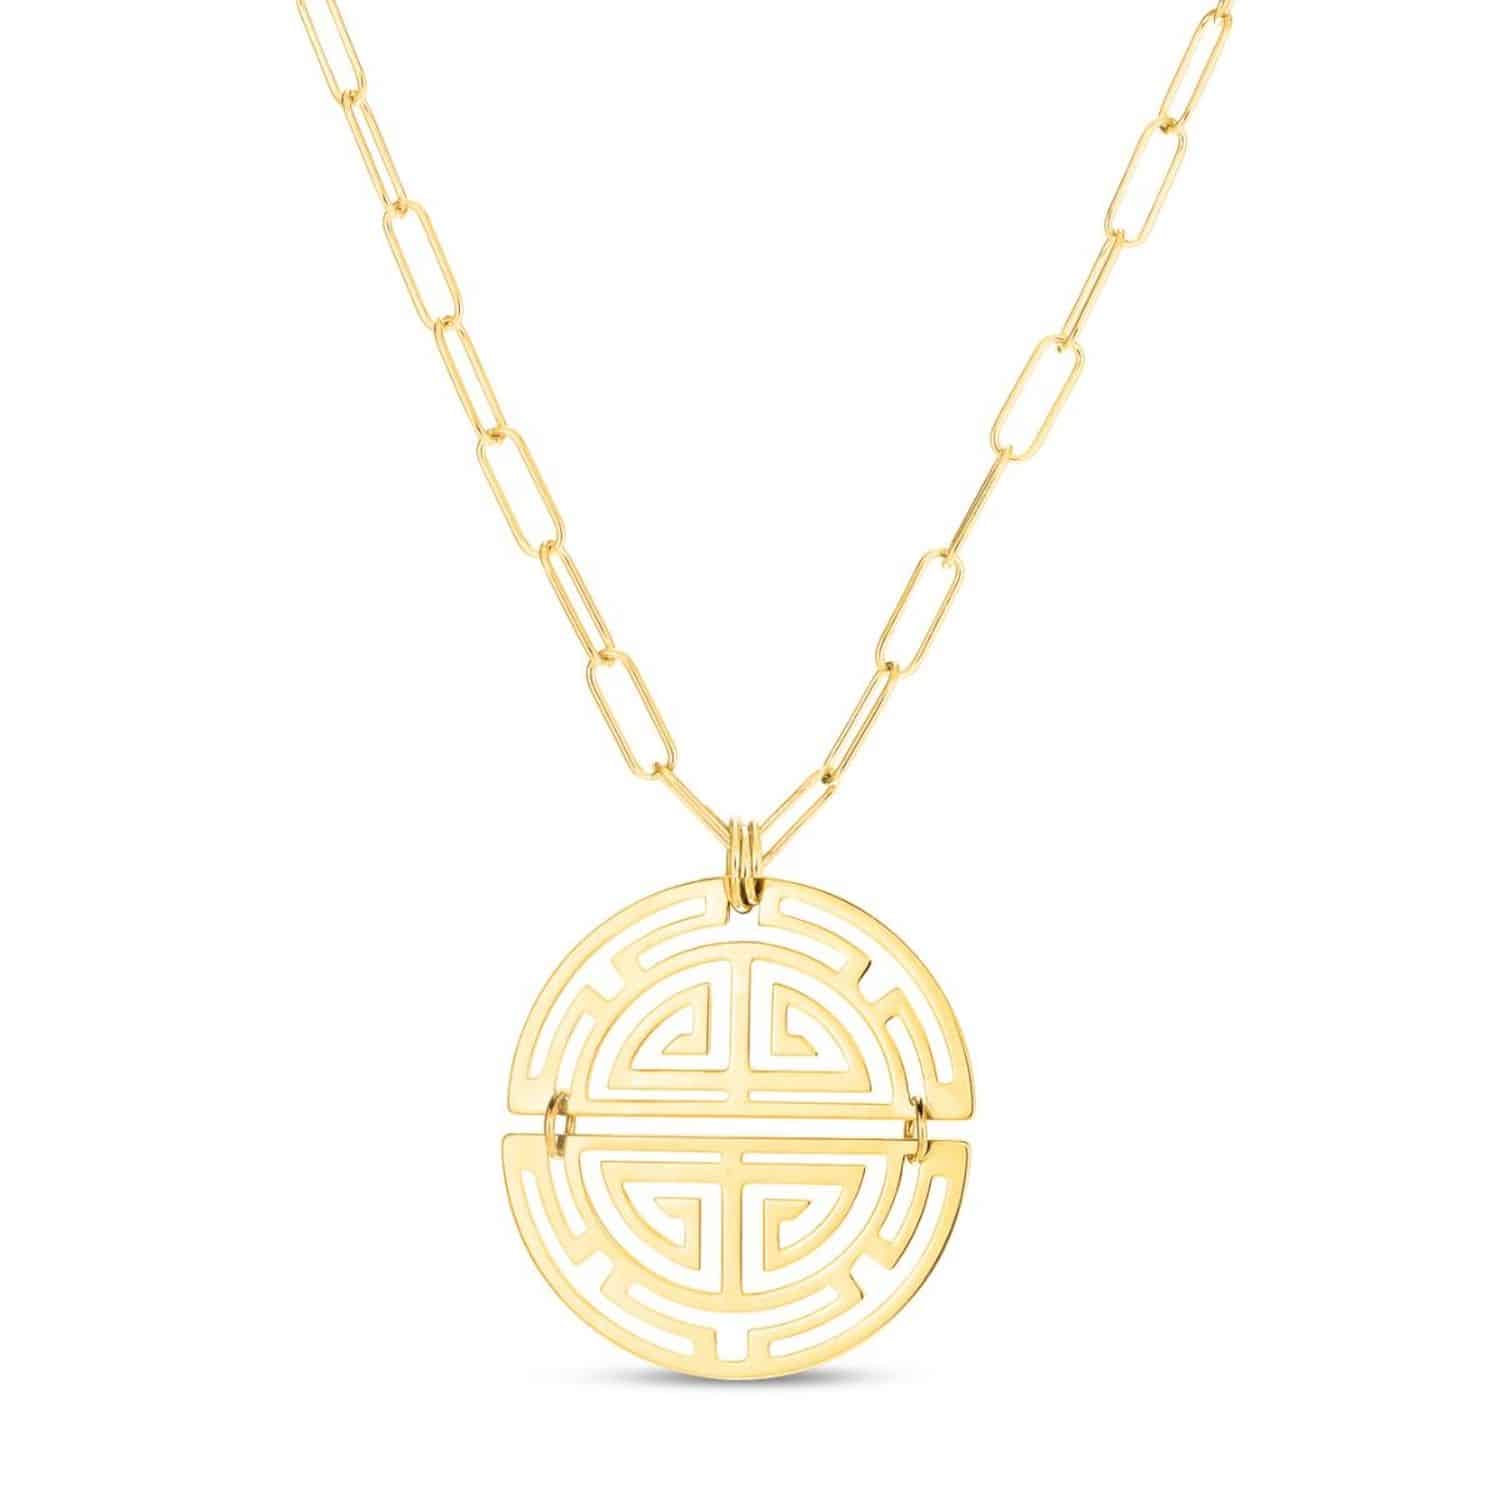 14K Yellow Gold Longevity Medallion Pendant on 2mm Paperclip Chain Necklace 18"